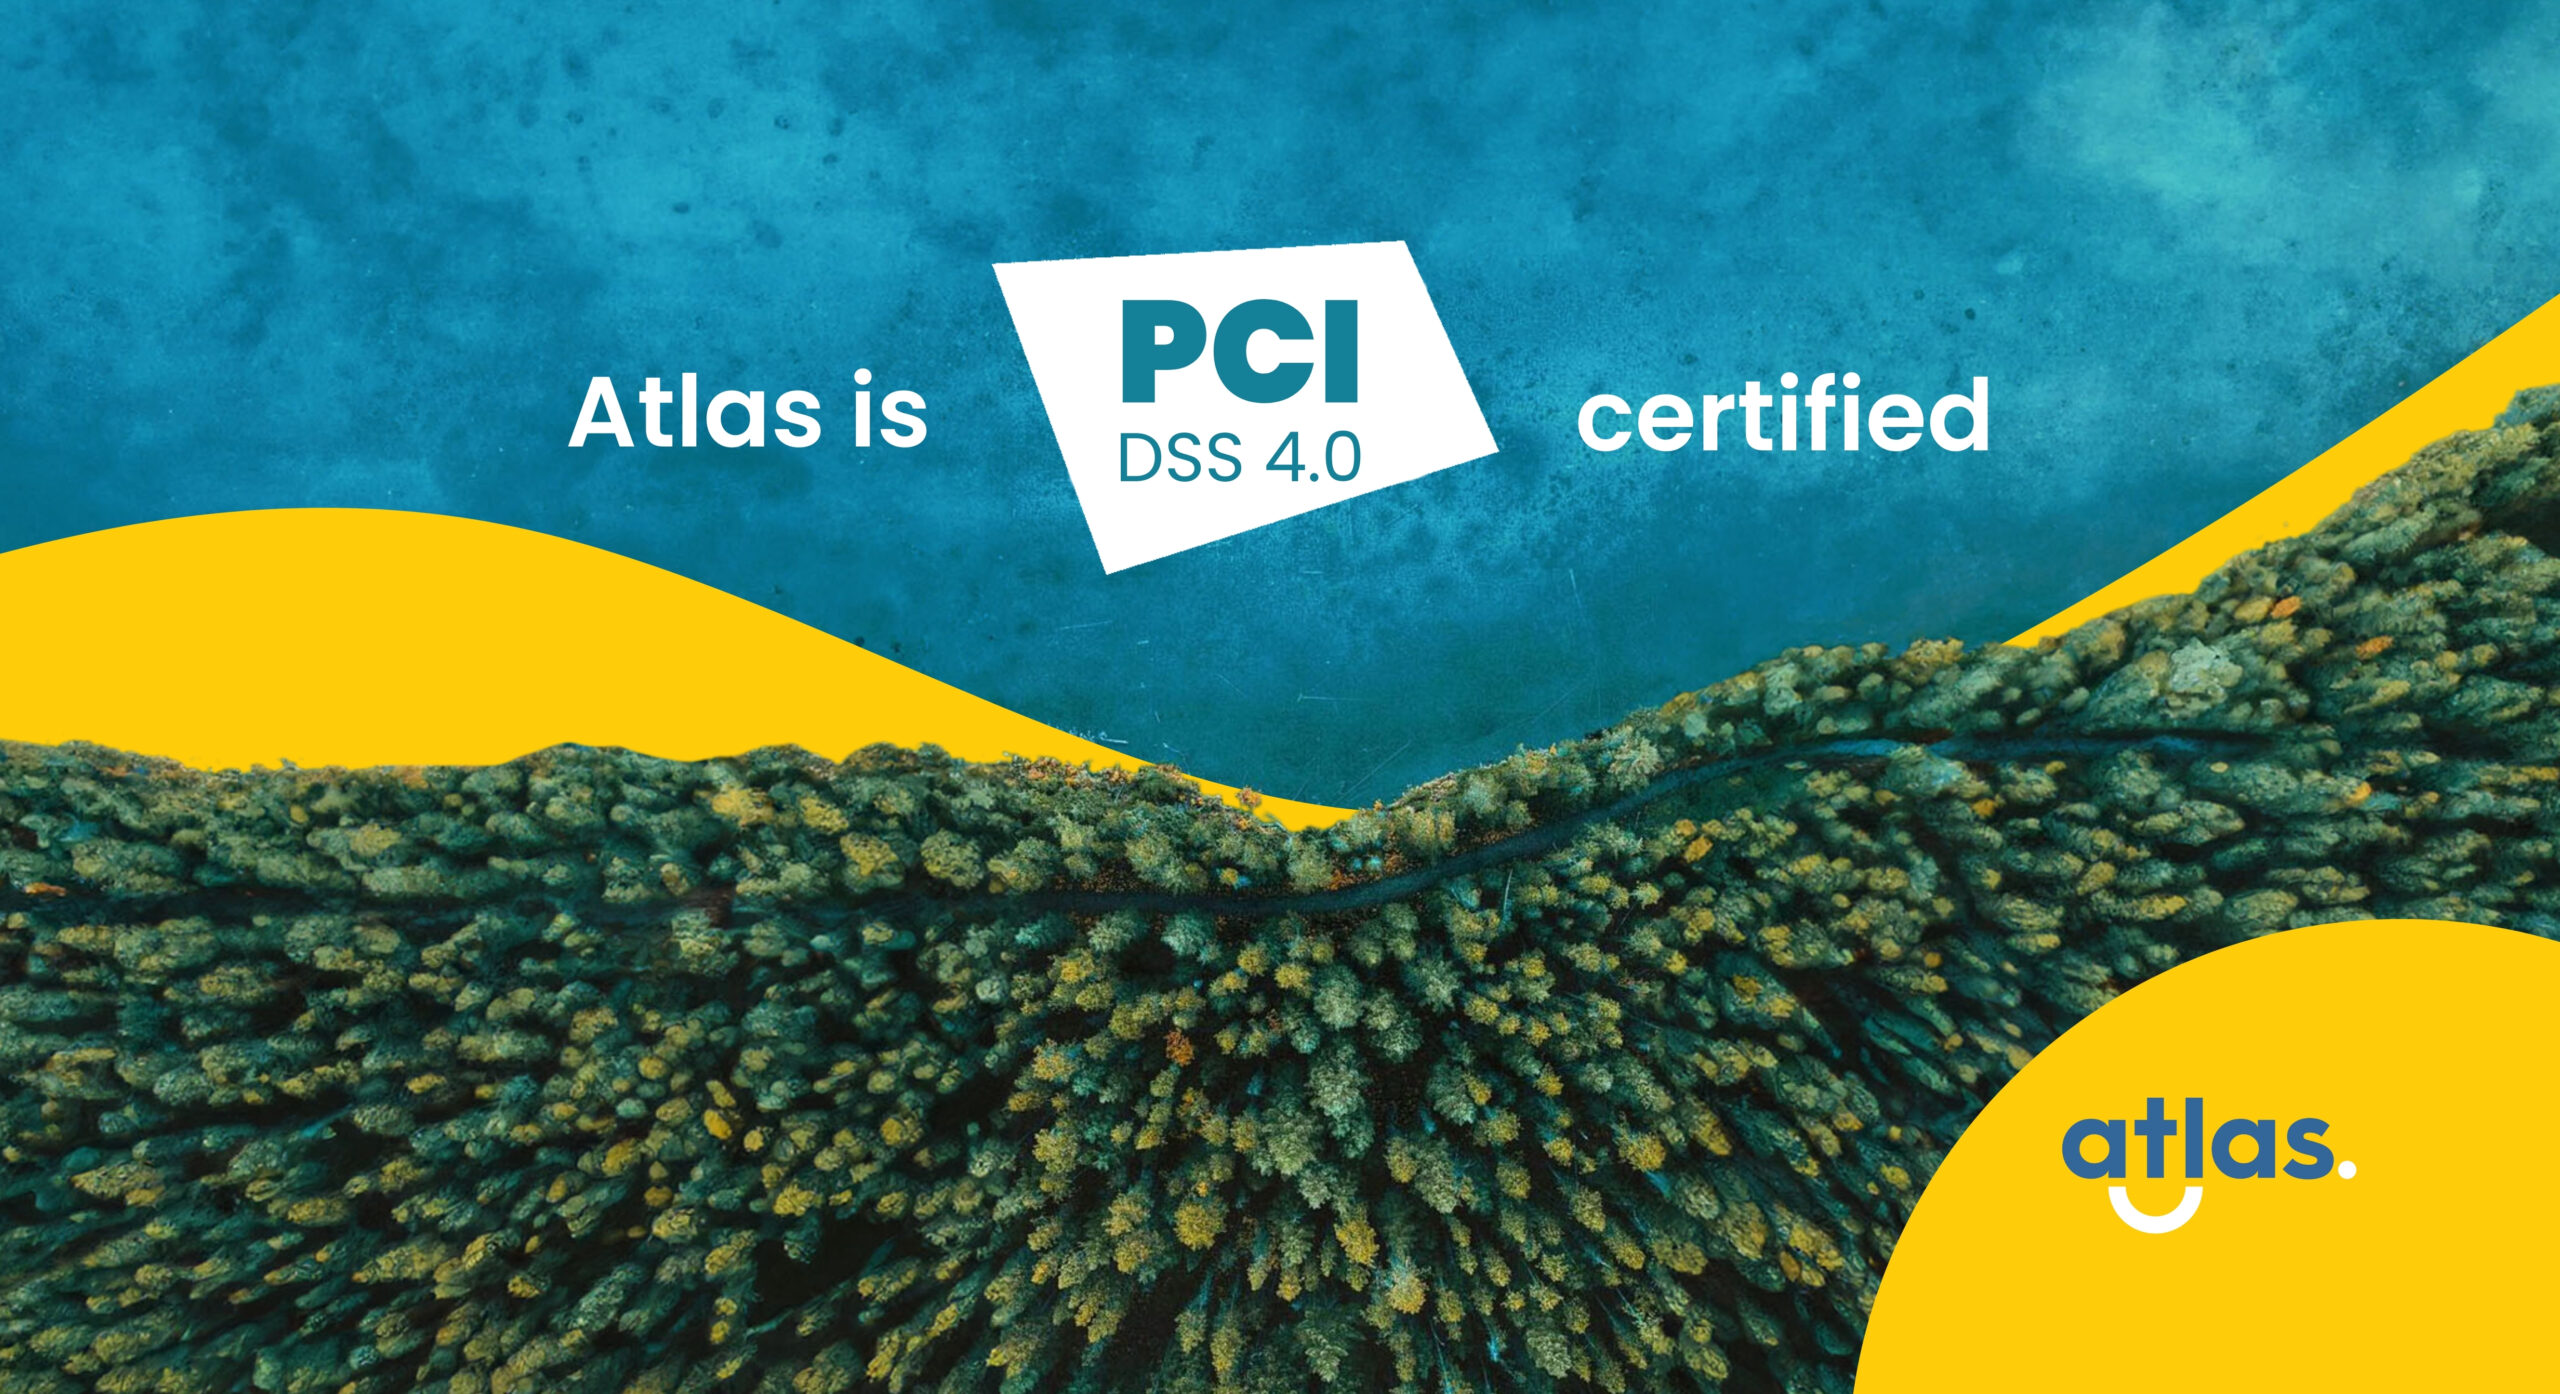 Data Security: Atlas confirmed its compliance with PCI DSS